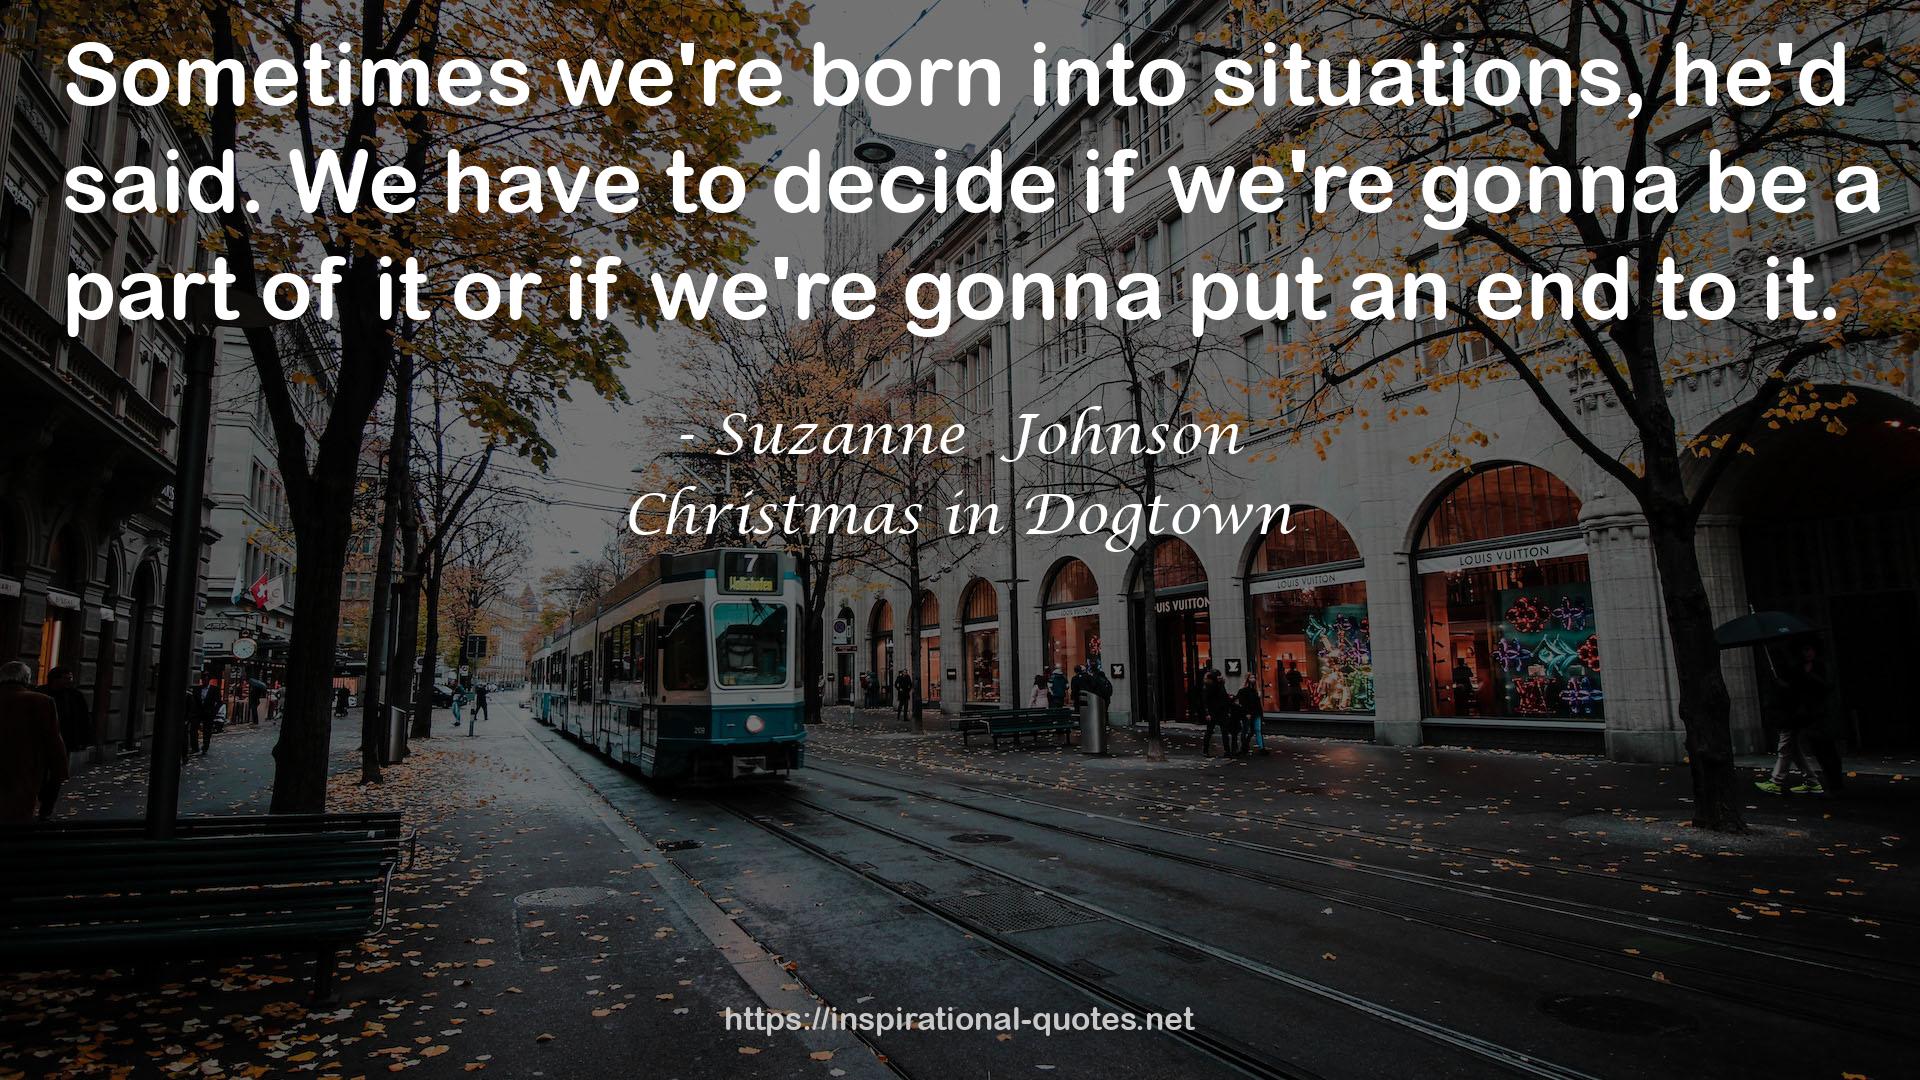 Christmas in Dogtown QUOTES